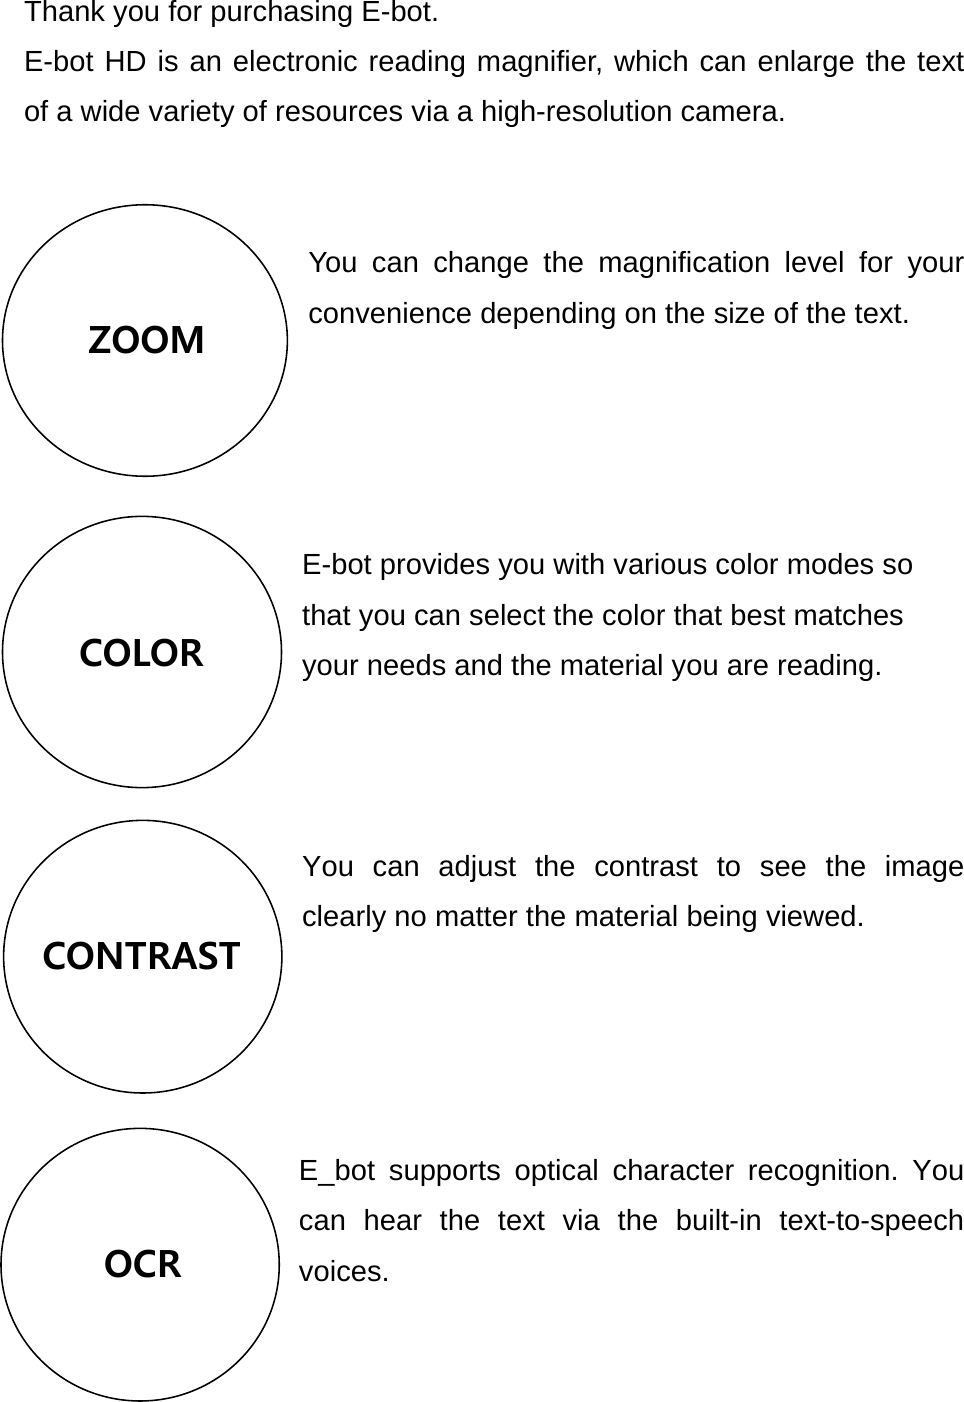  ZOOM  CONTRAST  COLOR  OCR Thank you for purchasing E-bot.   E-bot HD is an electronic reading magnifier, which can enlarge the text of a wide variety of resources via a high-resolution camera.   You can change the magnification level for your convenience depending on the size of the text.       E-bot provides you with various color modes so that you can select the color that best matches your needs and the material you are reading.    You can adjust the contrast to see the image clearly no matter the material being viewed.     E_bot supports optical character recognition. You can hear the text via the built-in text-to-speech voices.   